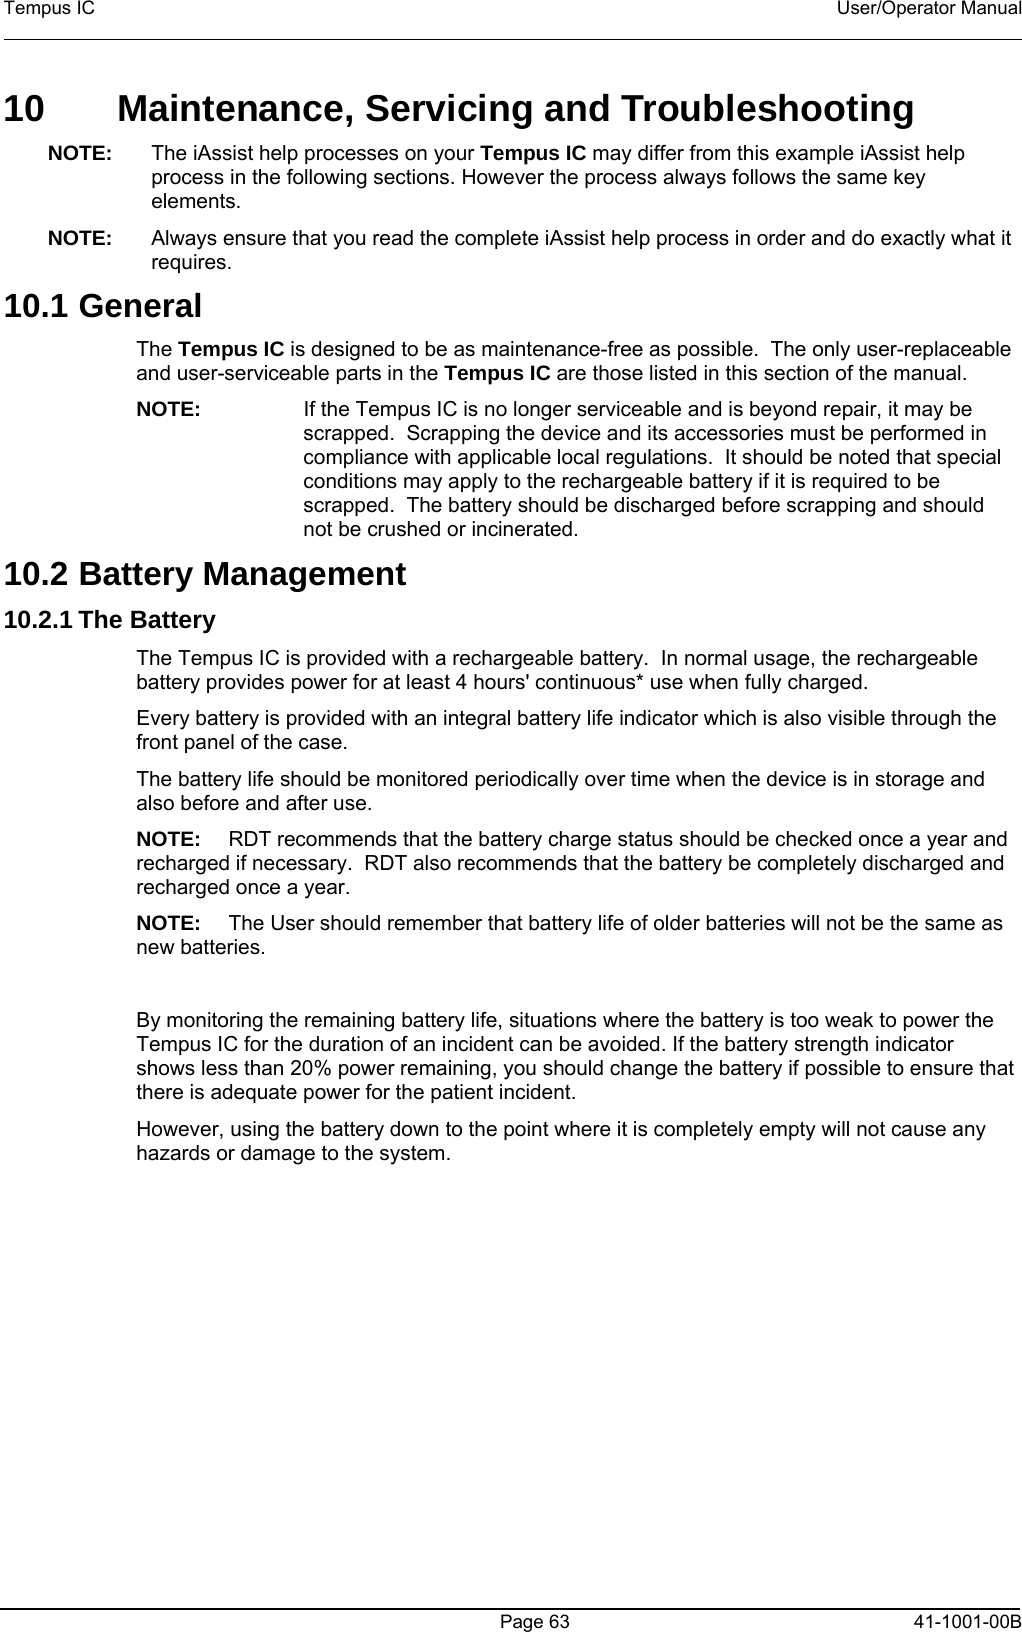 Tempus IC    User/Operator Manual      Page 63   41-1001-00B 10   Maintenance, Servicing and Troubleshooting NOTE:  The iAssist help processes on your Tempus IC may differ from this example iAssist help process in the following sections. However the process always follows the same key elements.   NOTE:  Always ensure that you read the complete iAssist help process in order and do exactly what it requires.  10.1 General The Tempus IC is designed to be as maintenance-free as possible.  The only user-replaceable and user-serviceable parts in the Tempus IC are those listed in this section of the manual.   NOTE:  If the Tempus IC is no longer serviceable and is beyond repair, it may be scrapped.  Scrapping the device and its accessories must be performed in compliance with applicable local regulations.  It should be noted that special conditions may apply to the rechargeable battery if it is required to be scrapped.  The battery should be discharged before scrapping and should not be crushed or incinerated. 10.2 Battery Management 10.2.1 The Battery  The Tempus IC is provided with a rechargeable battery.  In normal usage, the rechargeable battery provides power for at least 4 hours&apos; continuous* use when fully charged.   Every battery is provided with an integral battery life indicator which is also visible through the front panel of the case.   The battery life should be monitored periodically over time when the device is in storage and also before and after use.   NOTE:  RDT recommends that the battery charge status should be checked once a year and recharged if necessary.  RDT also recommends that the battery be completely discharged and recharged once a year. NOTE:  The User should remember that battery life of older batteries will not be the same as new batteries.  By monitoring the remaining battery life, situations where the battery is too weak to power the Tempus IC for the duration of an incident can be avoided. If the battery strength indicator shows less than 20% power remaining, you should change the battery if possible to ensure that there is adequate power for the patient incident.   However, using the battery down to the point where it is completely empty will not cause any hazards or damage to the system. 